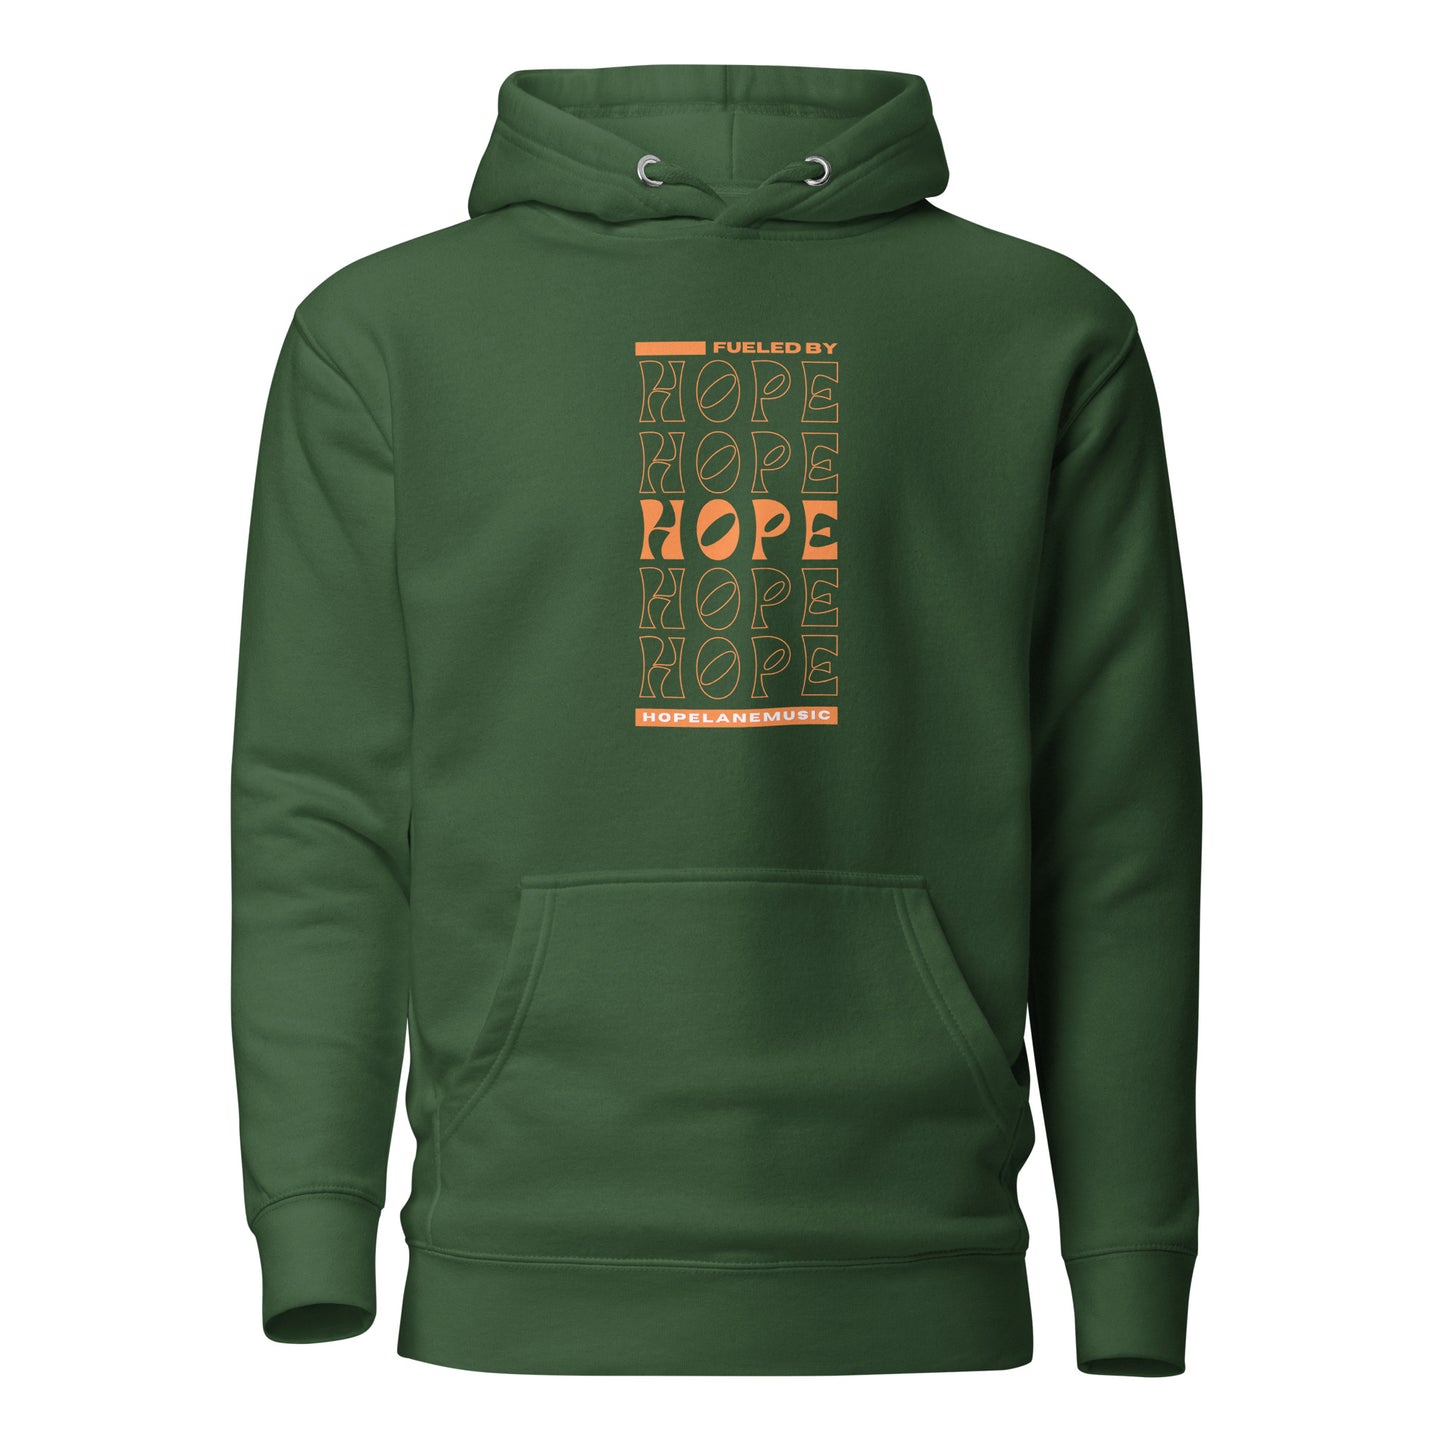 'Fueled by Hope' (retro edition) Unisex Hoodie (official Hope Lane Merch)